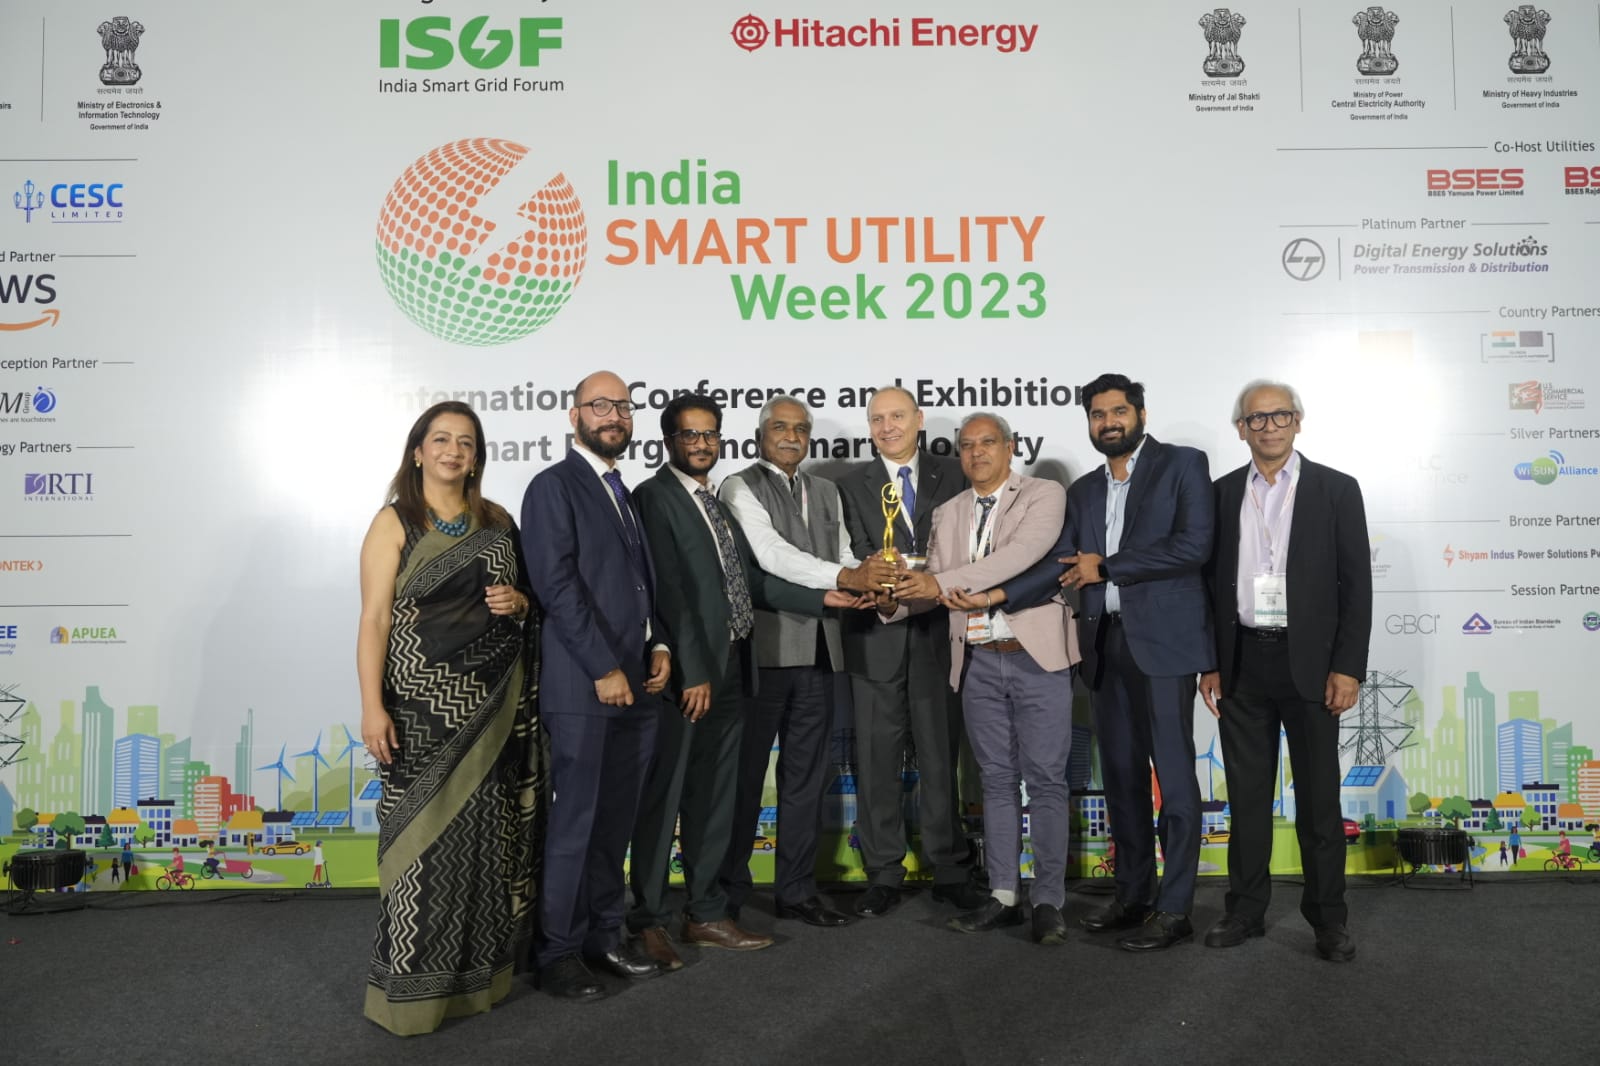 Awarded in Diamond (1st ) category by India Smart Grid Forum(ISGF)